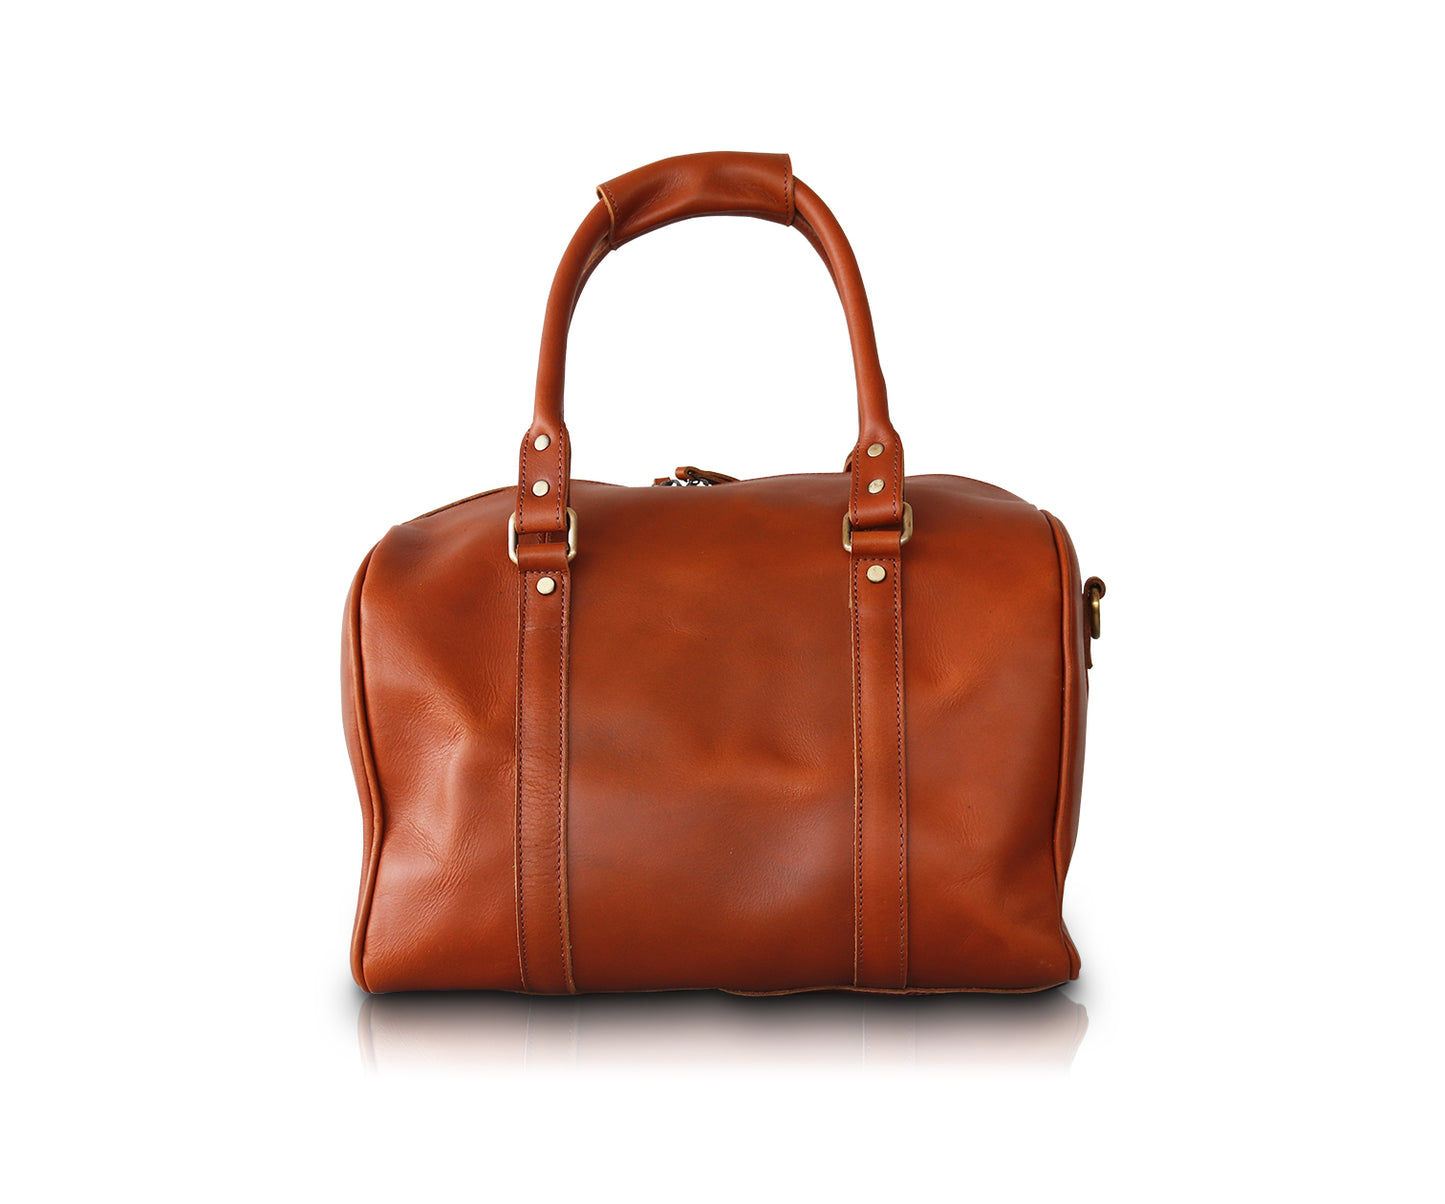 Personalized Leather Duffle Bag - XLarge – Vellaire